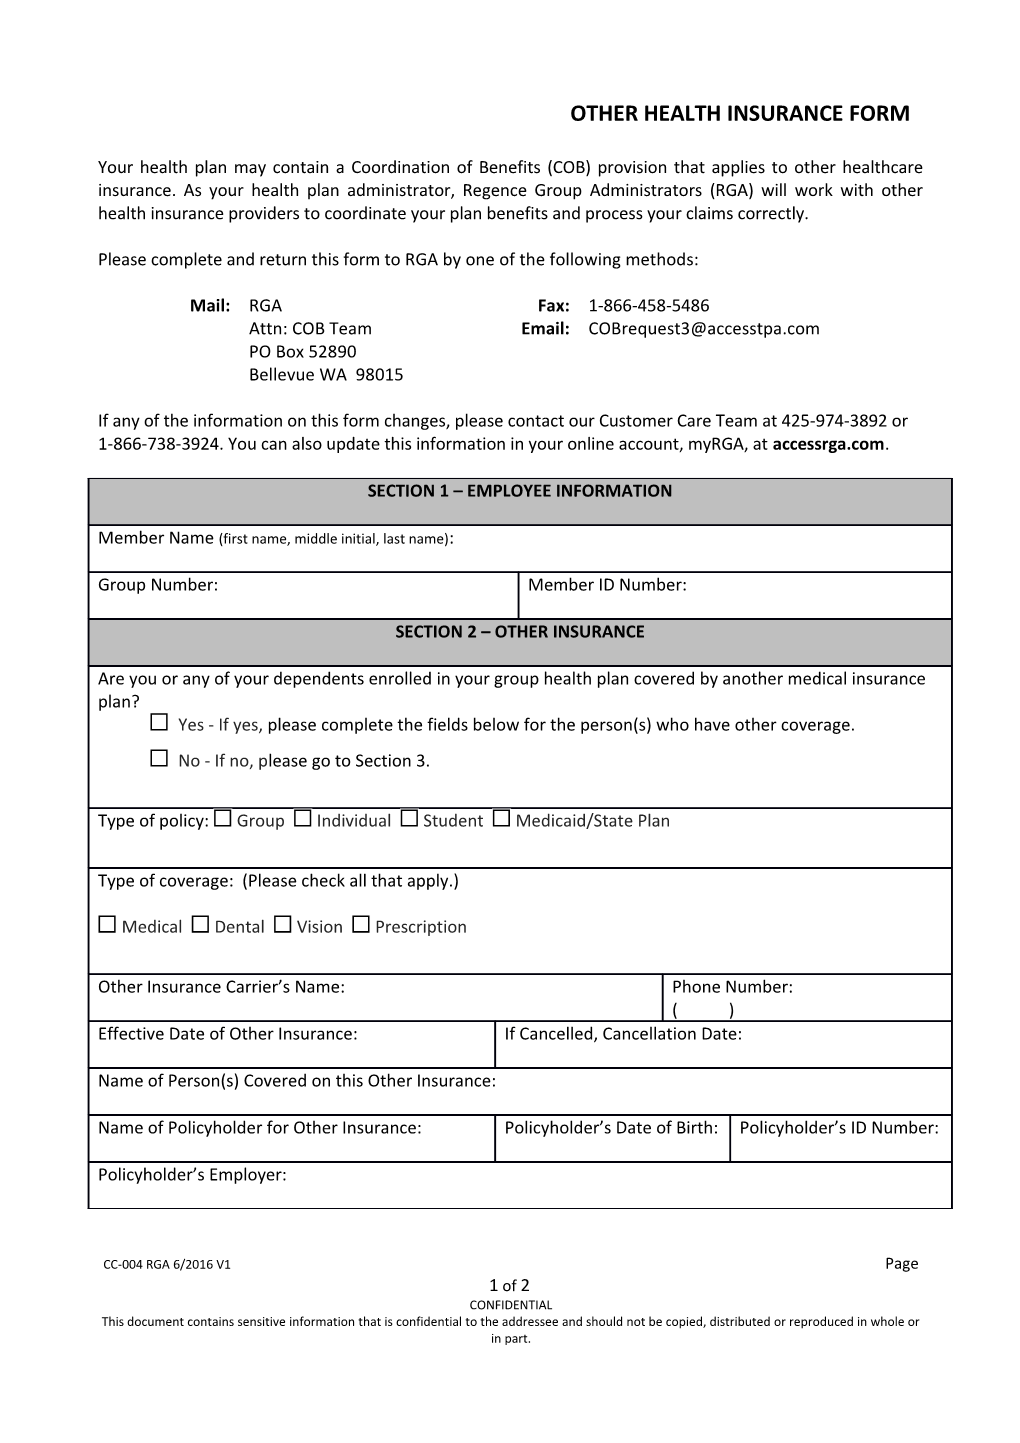 Other Health Insurance Form